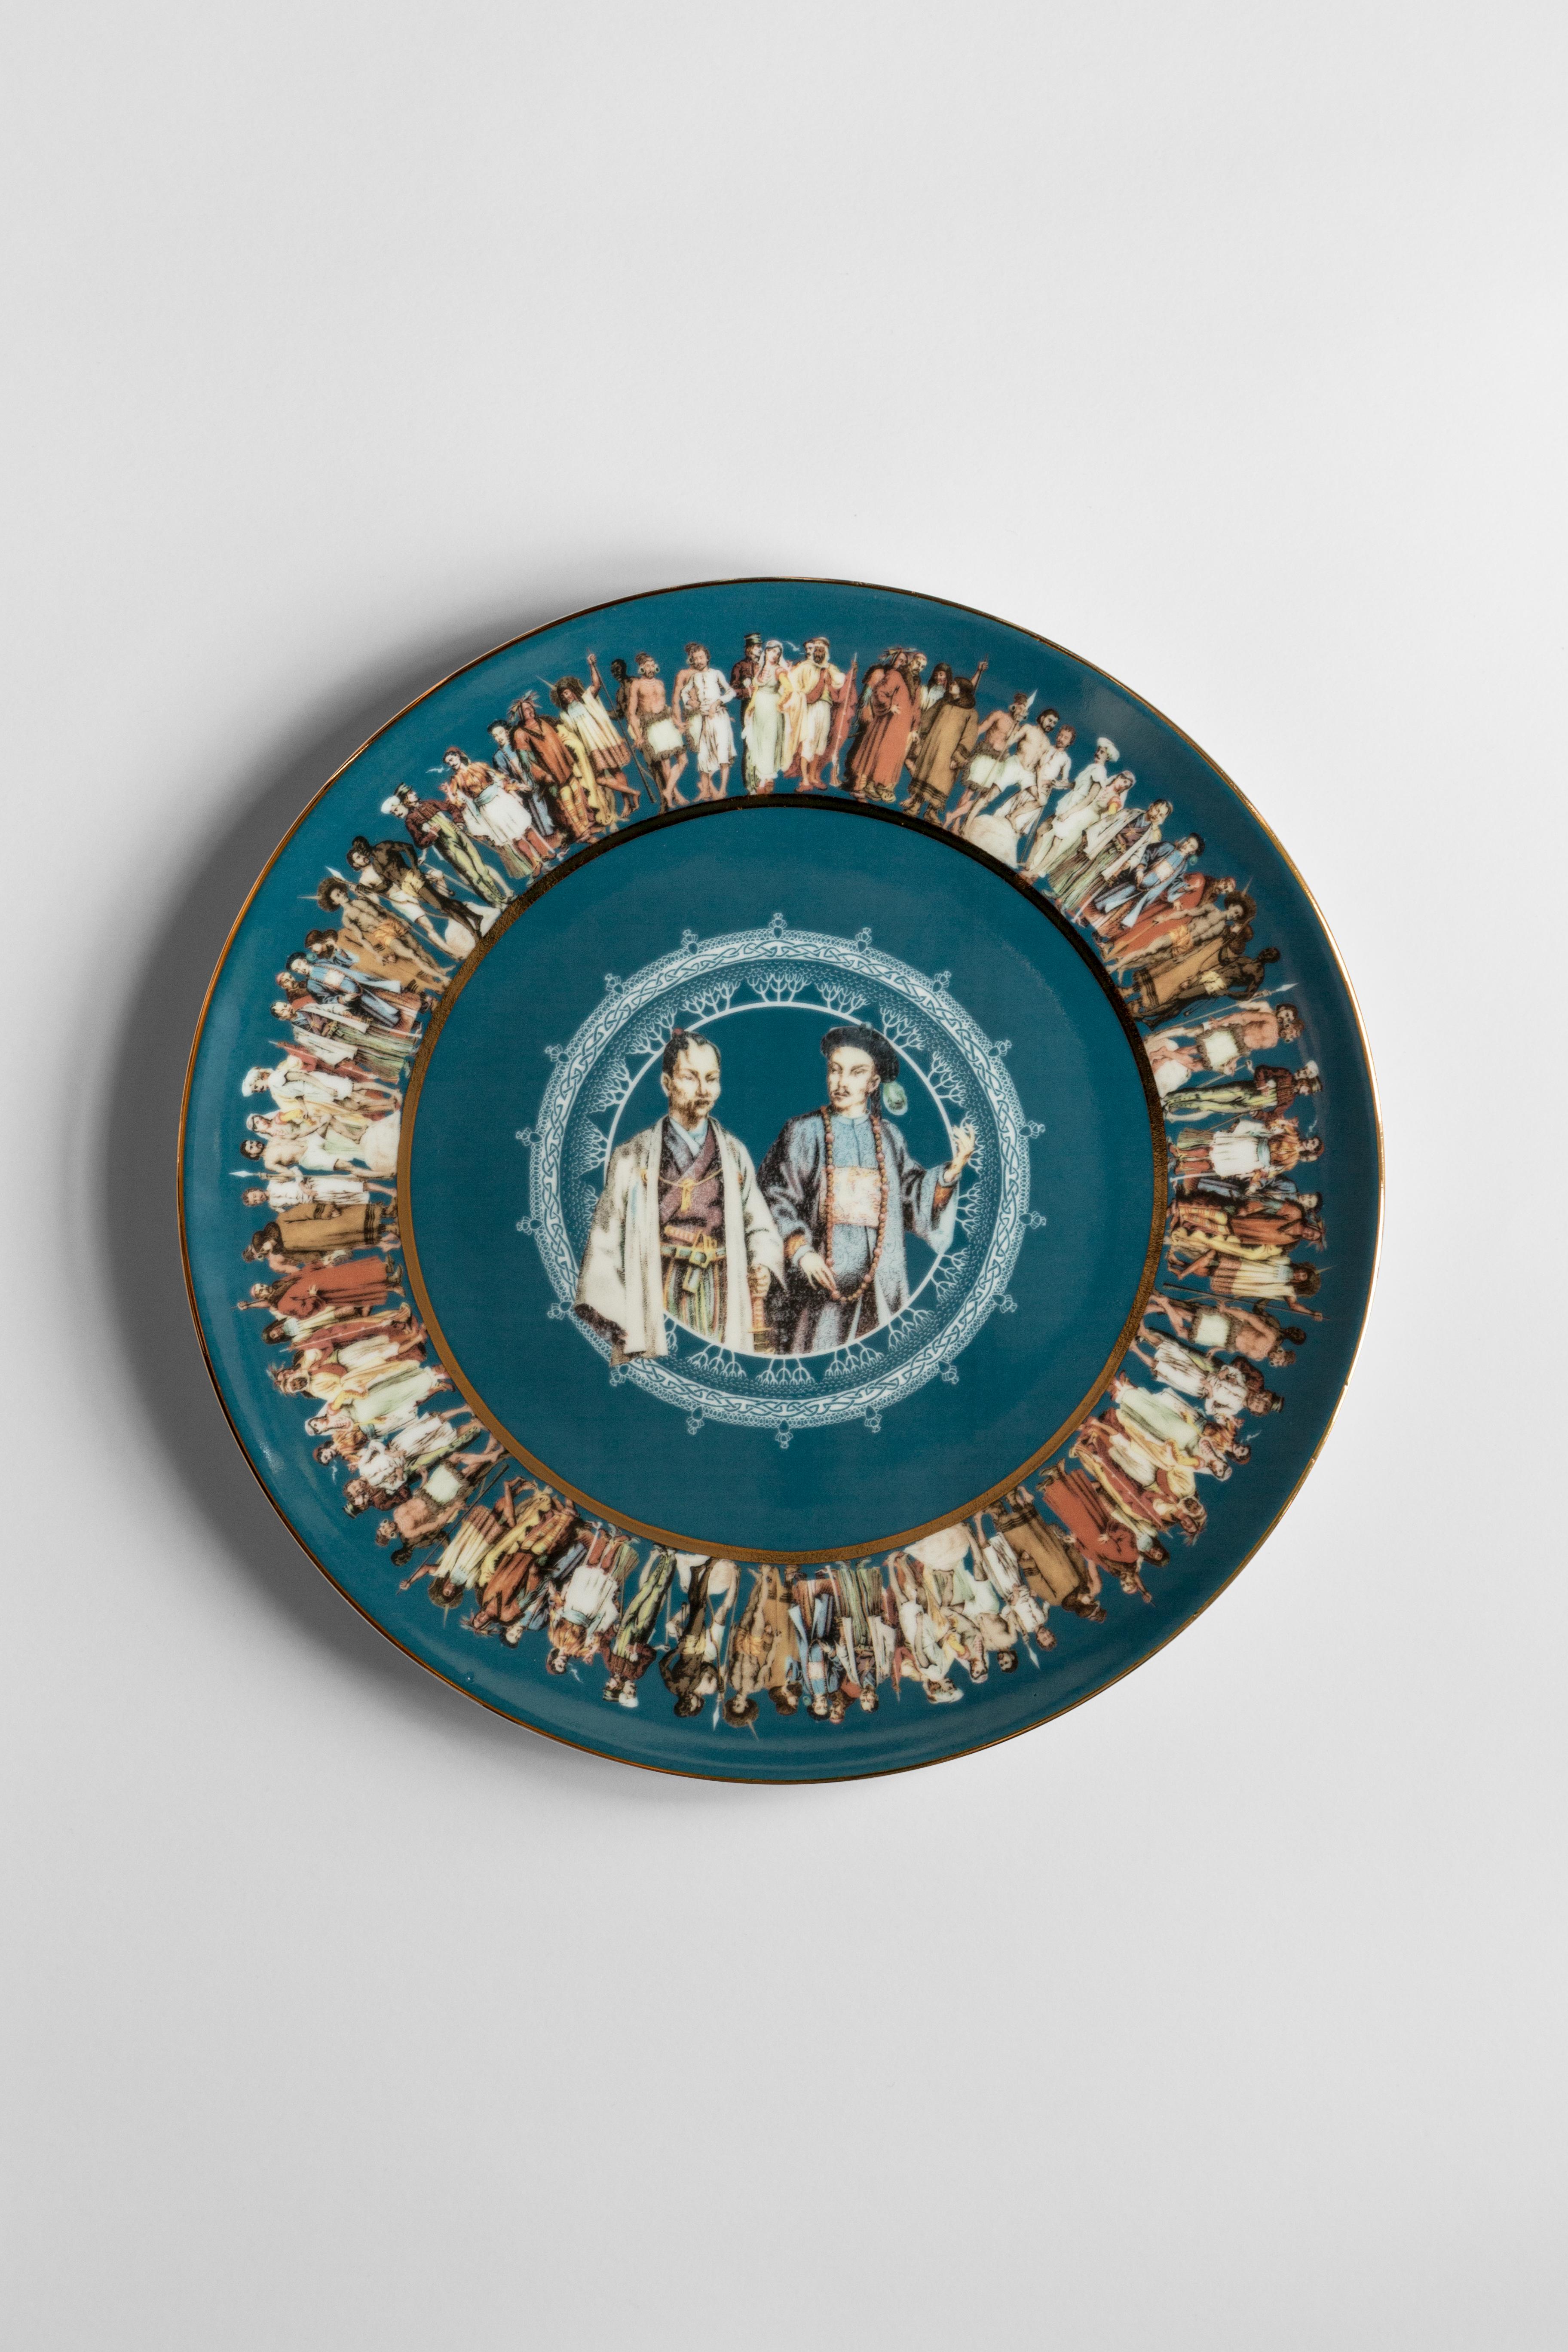 The series of dishes The Human Being narrates the variety of human populations, paying homage to customs and traditions. Faraway in time and space, the different peoples portrayed interact through looks and gestures.
The composition is framed by